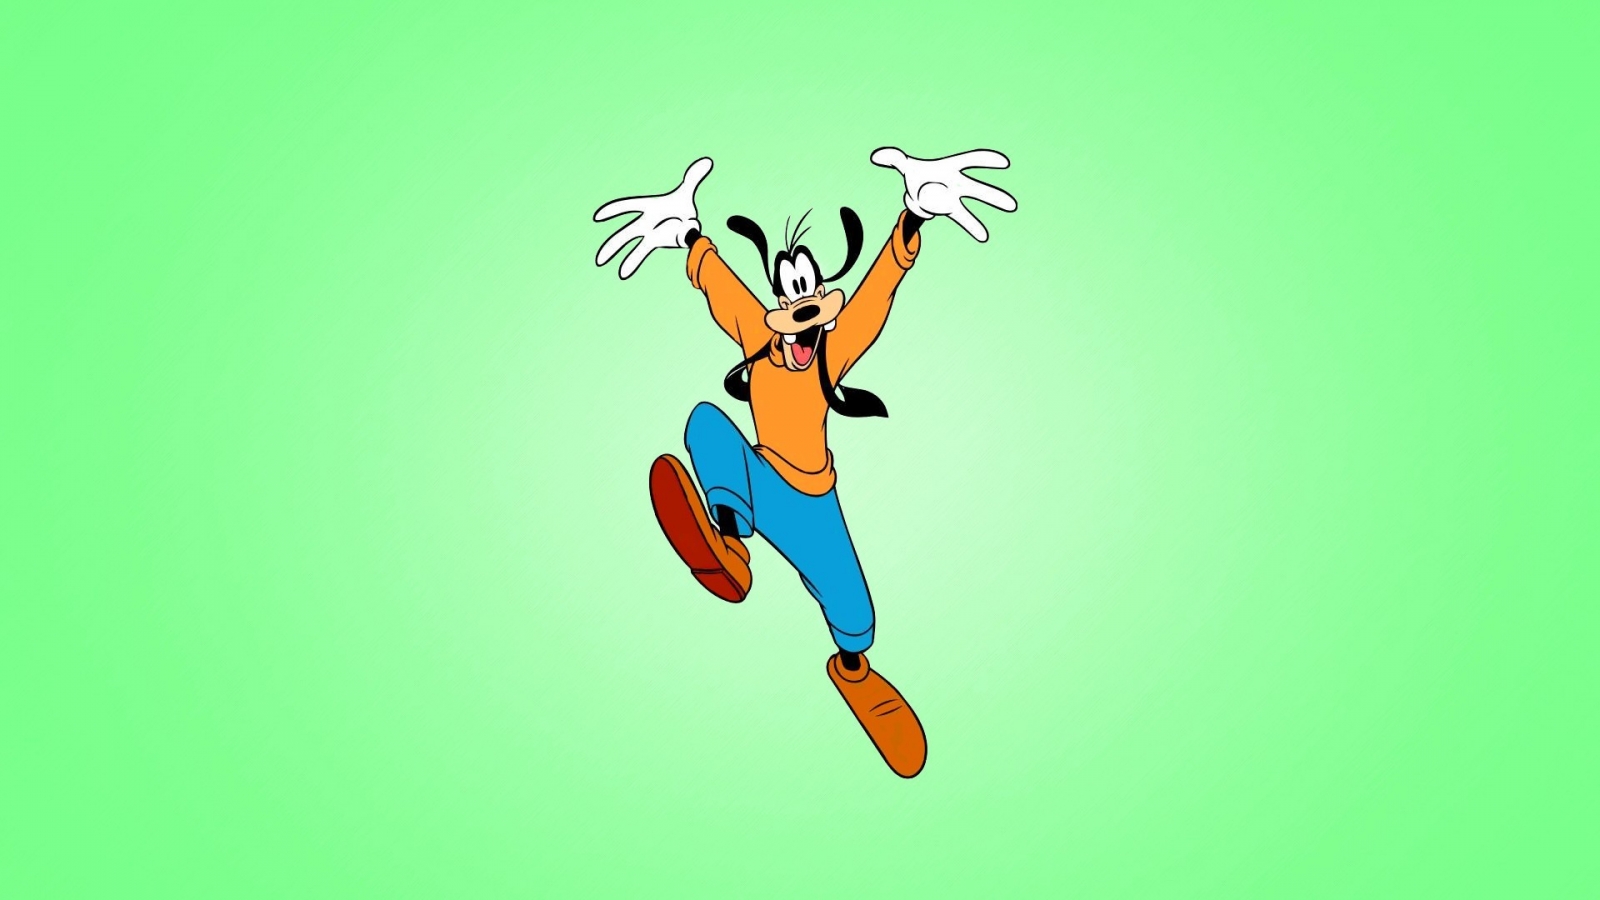 Goofy Character for 1600 x 900 HDTV resolution